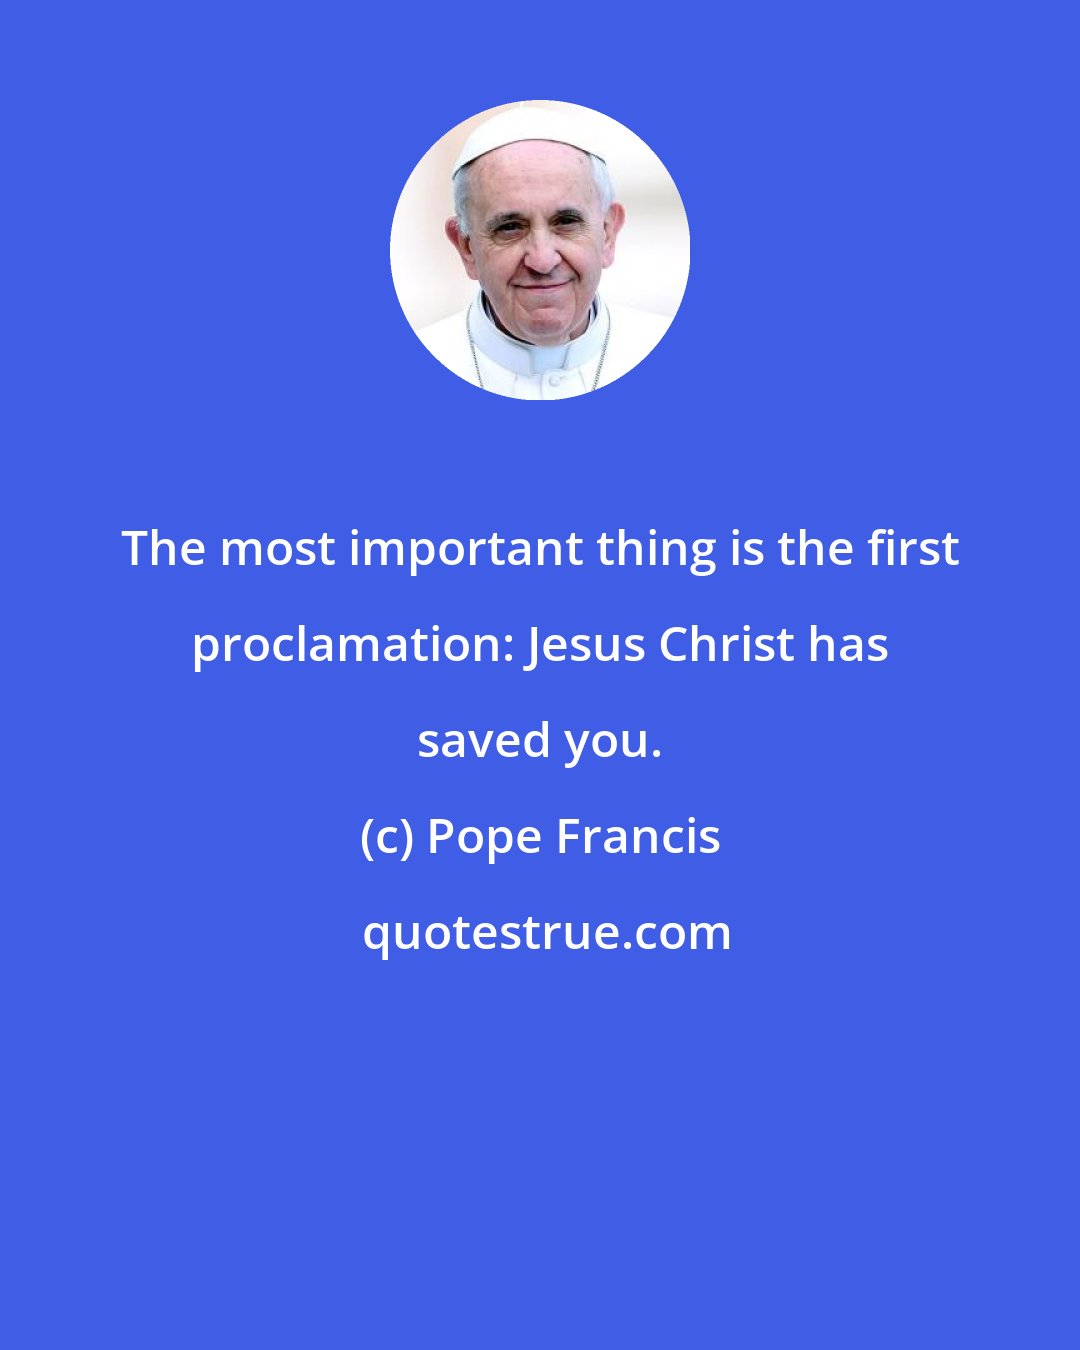 Pope Francis: The most important thing is the first proclamation: Jesus Christ has saved you.